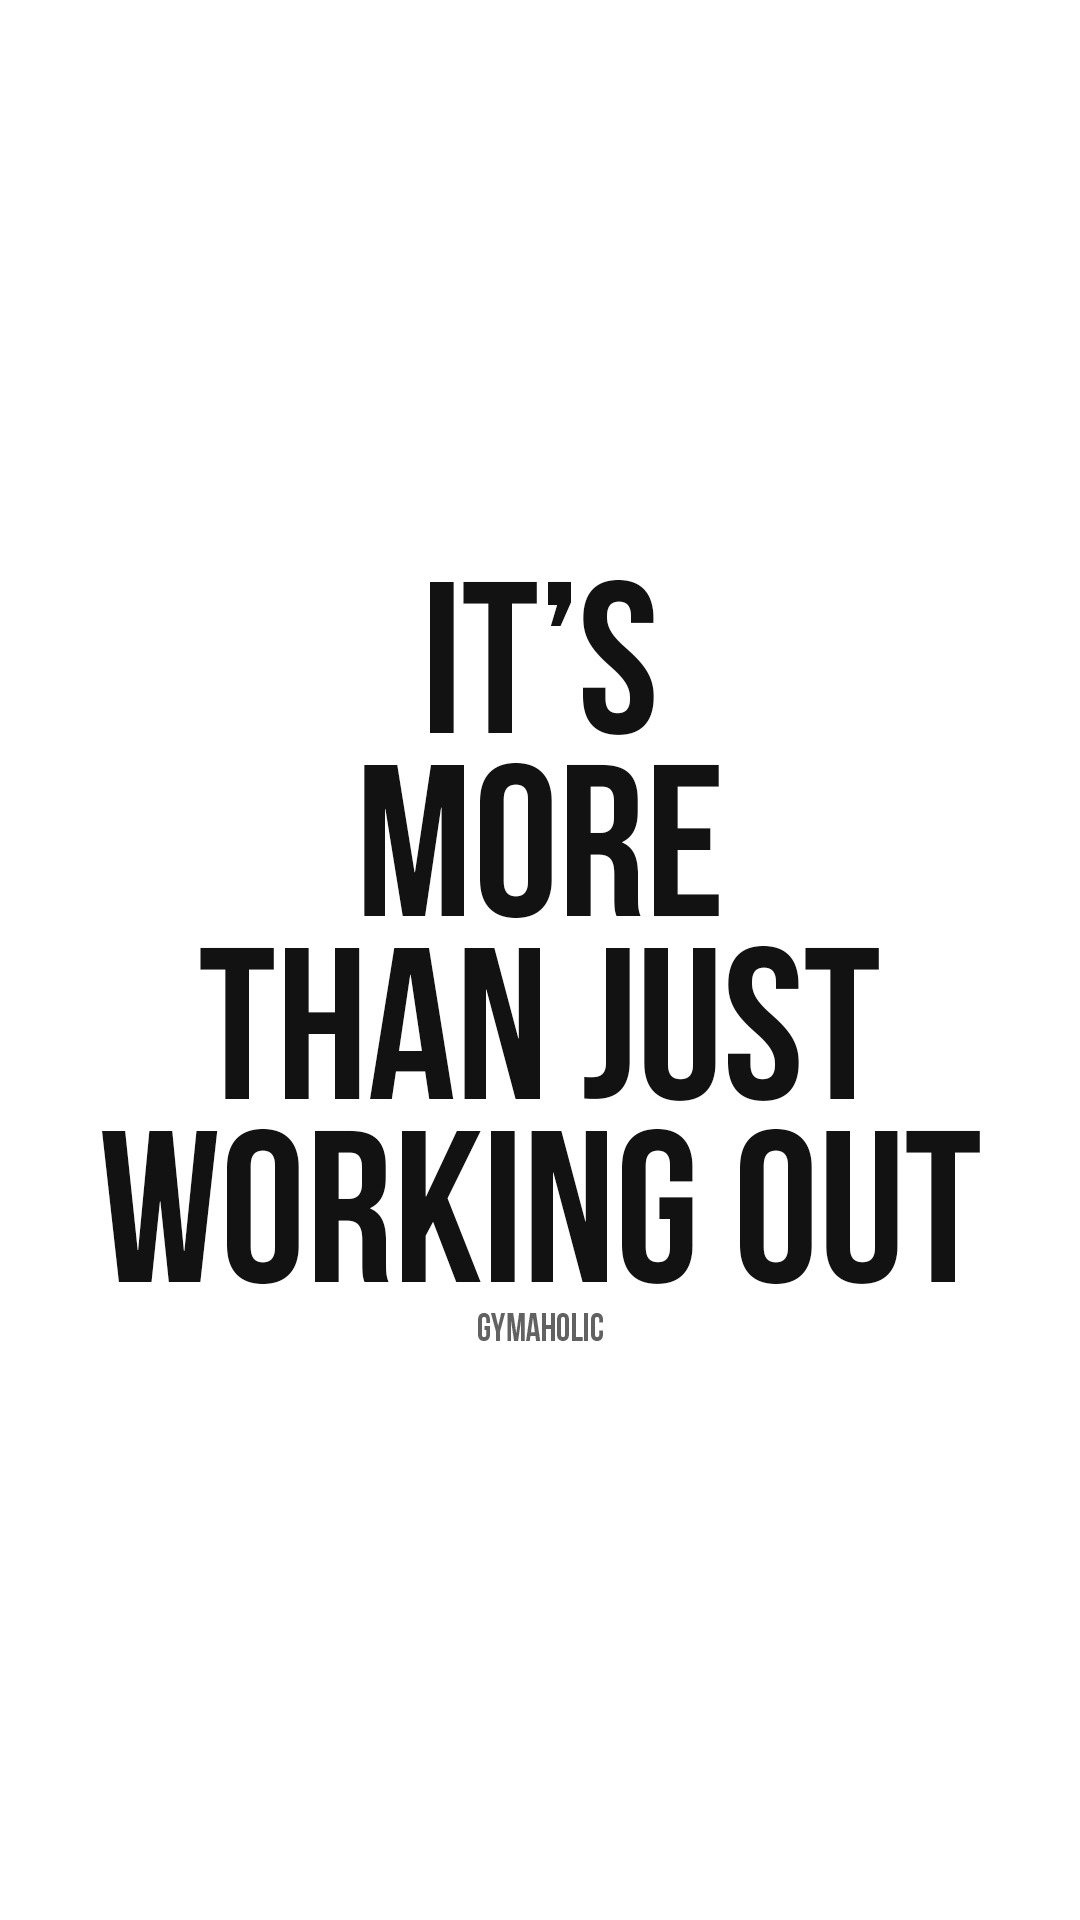 It’s more than just working out